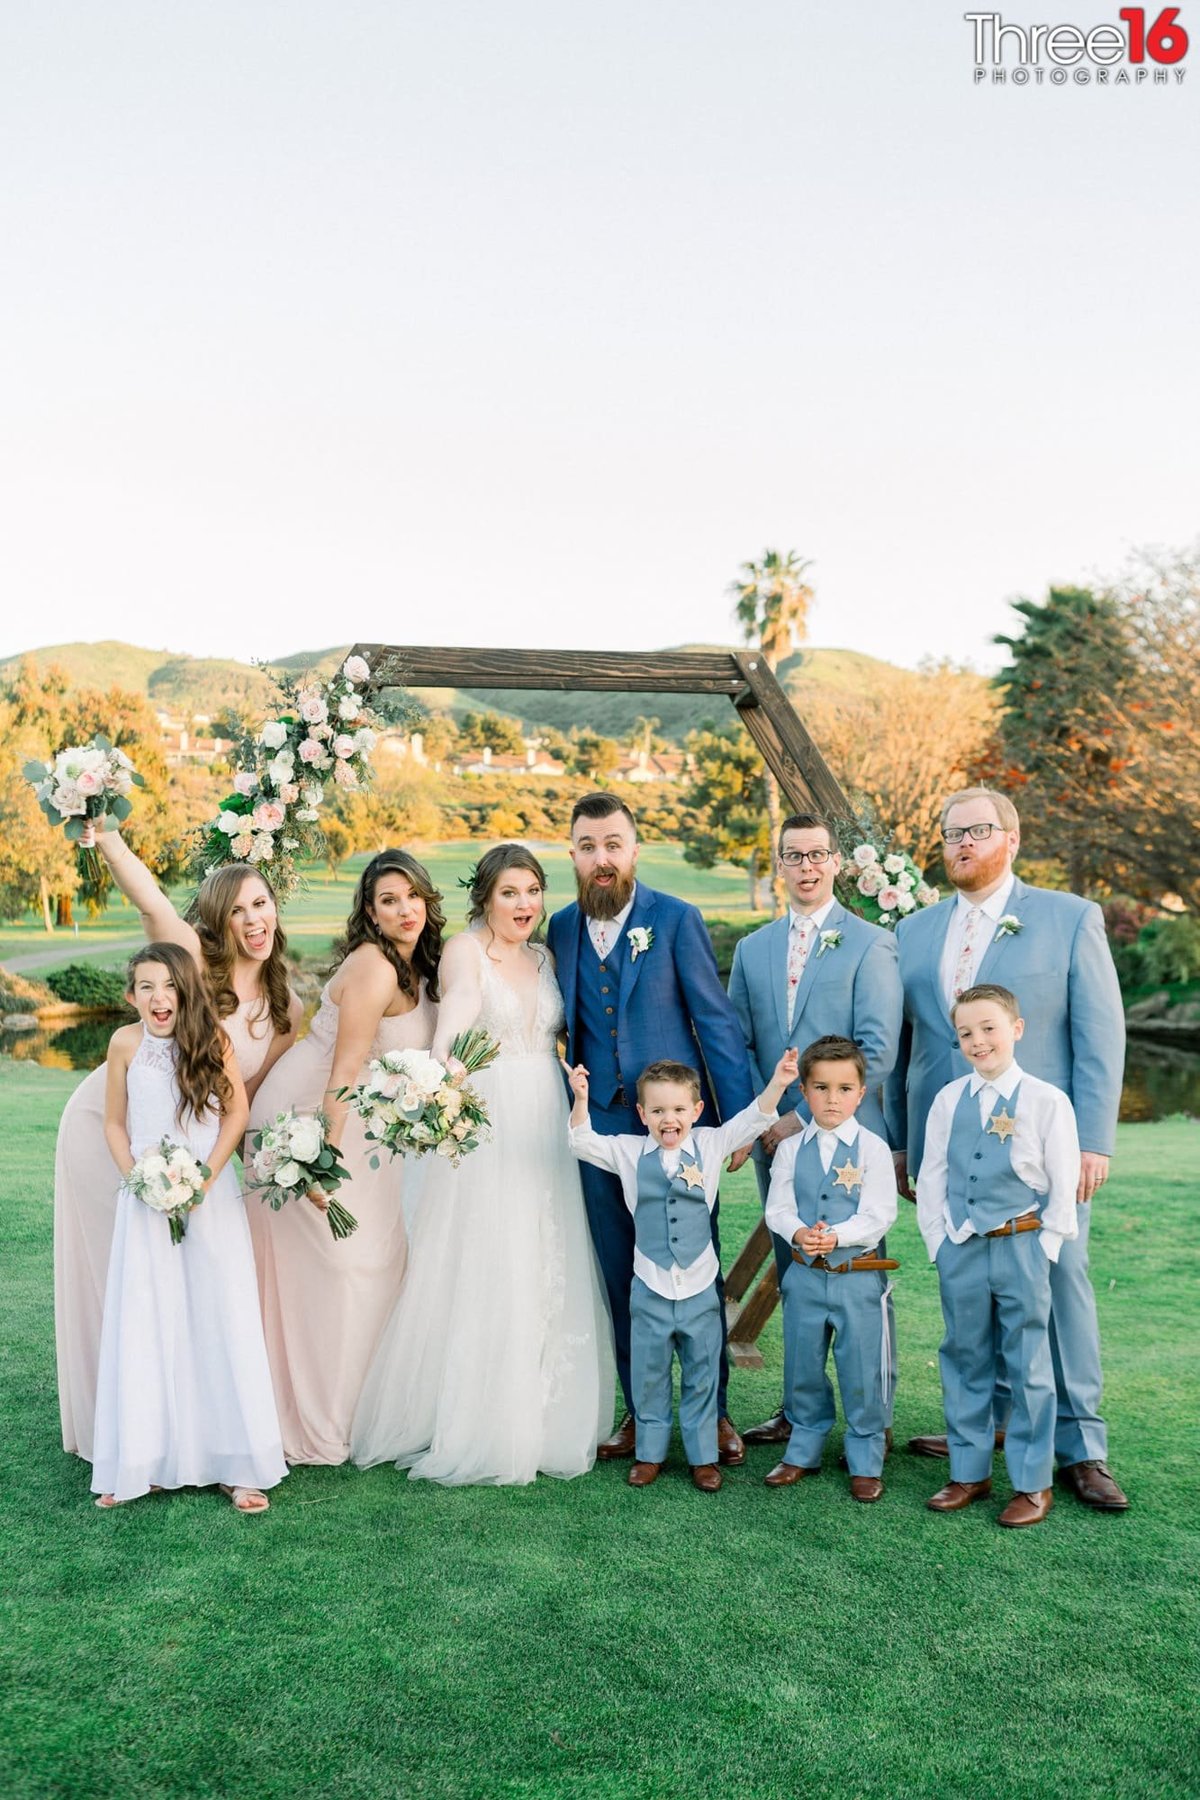 Bride and Groom pose with their bridal party kids included